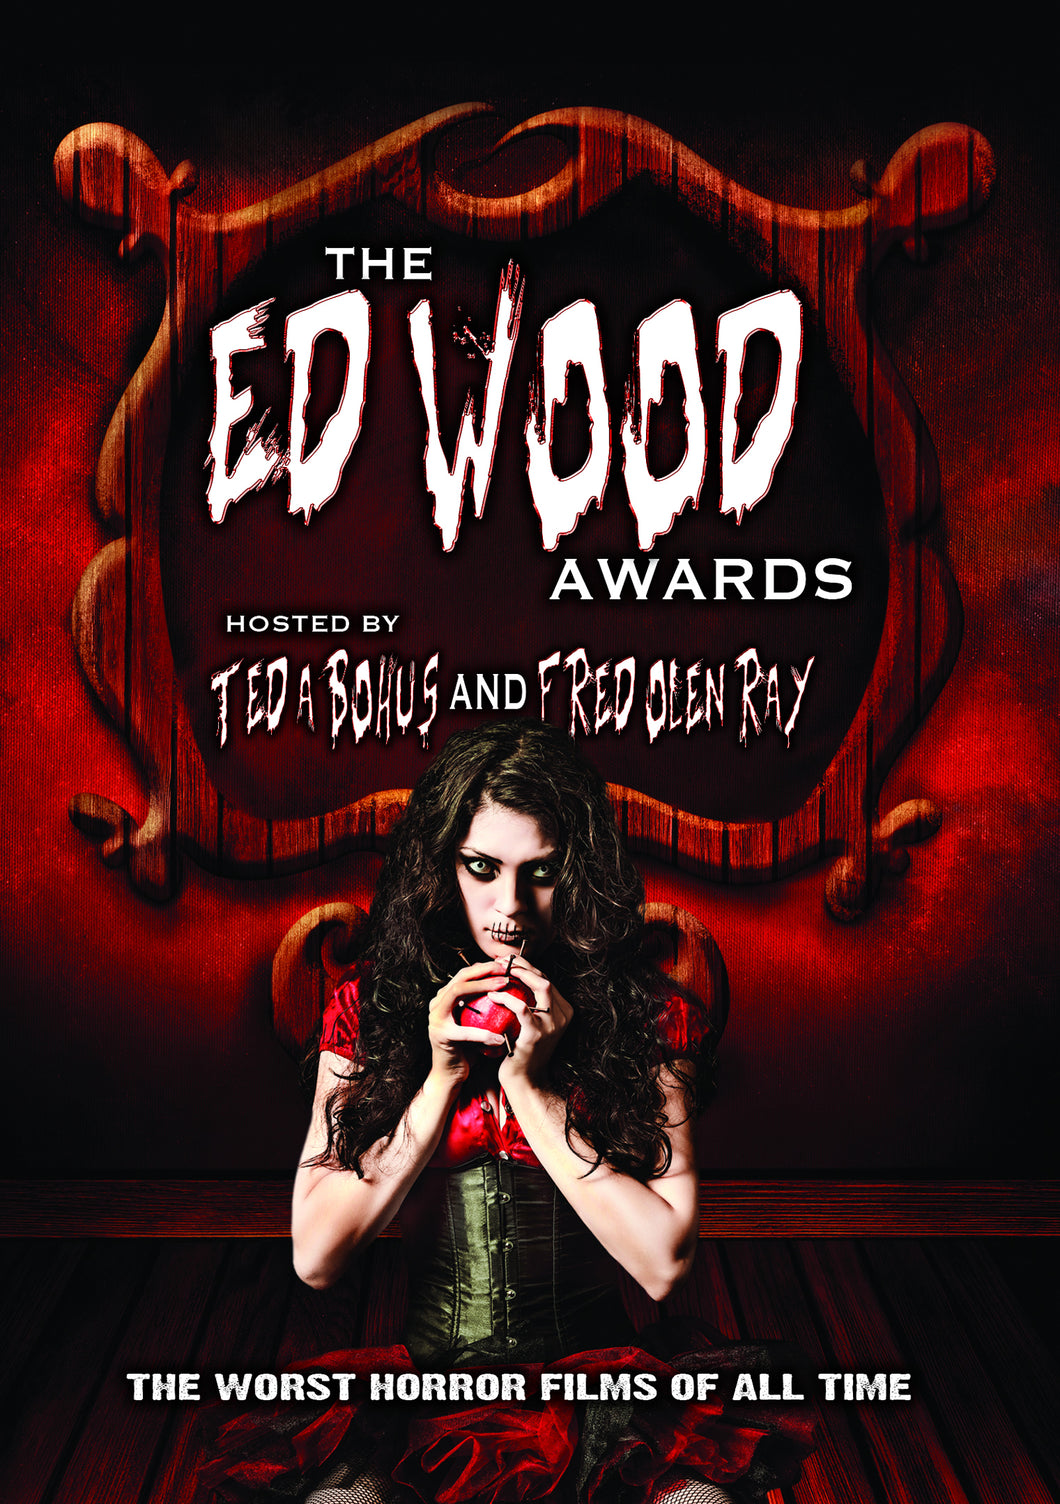 Ed Wood Awards: The Worst Horror Movies Ever Made (DVD)